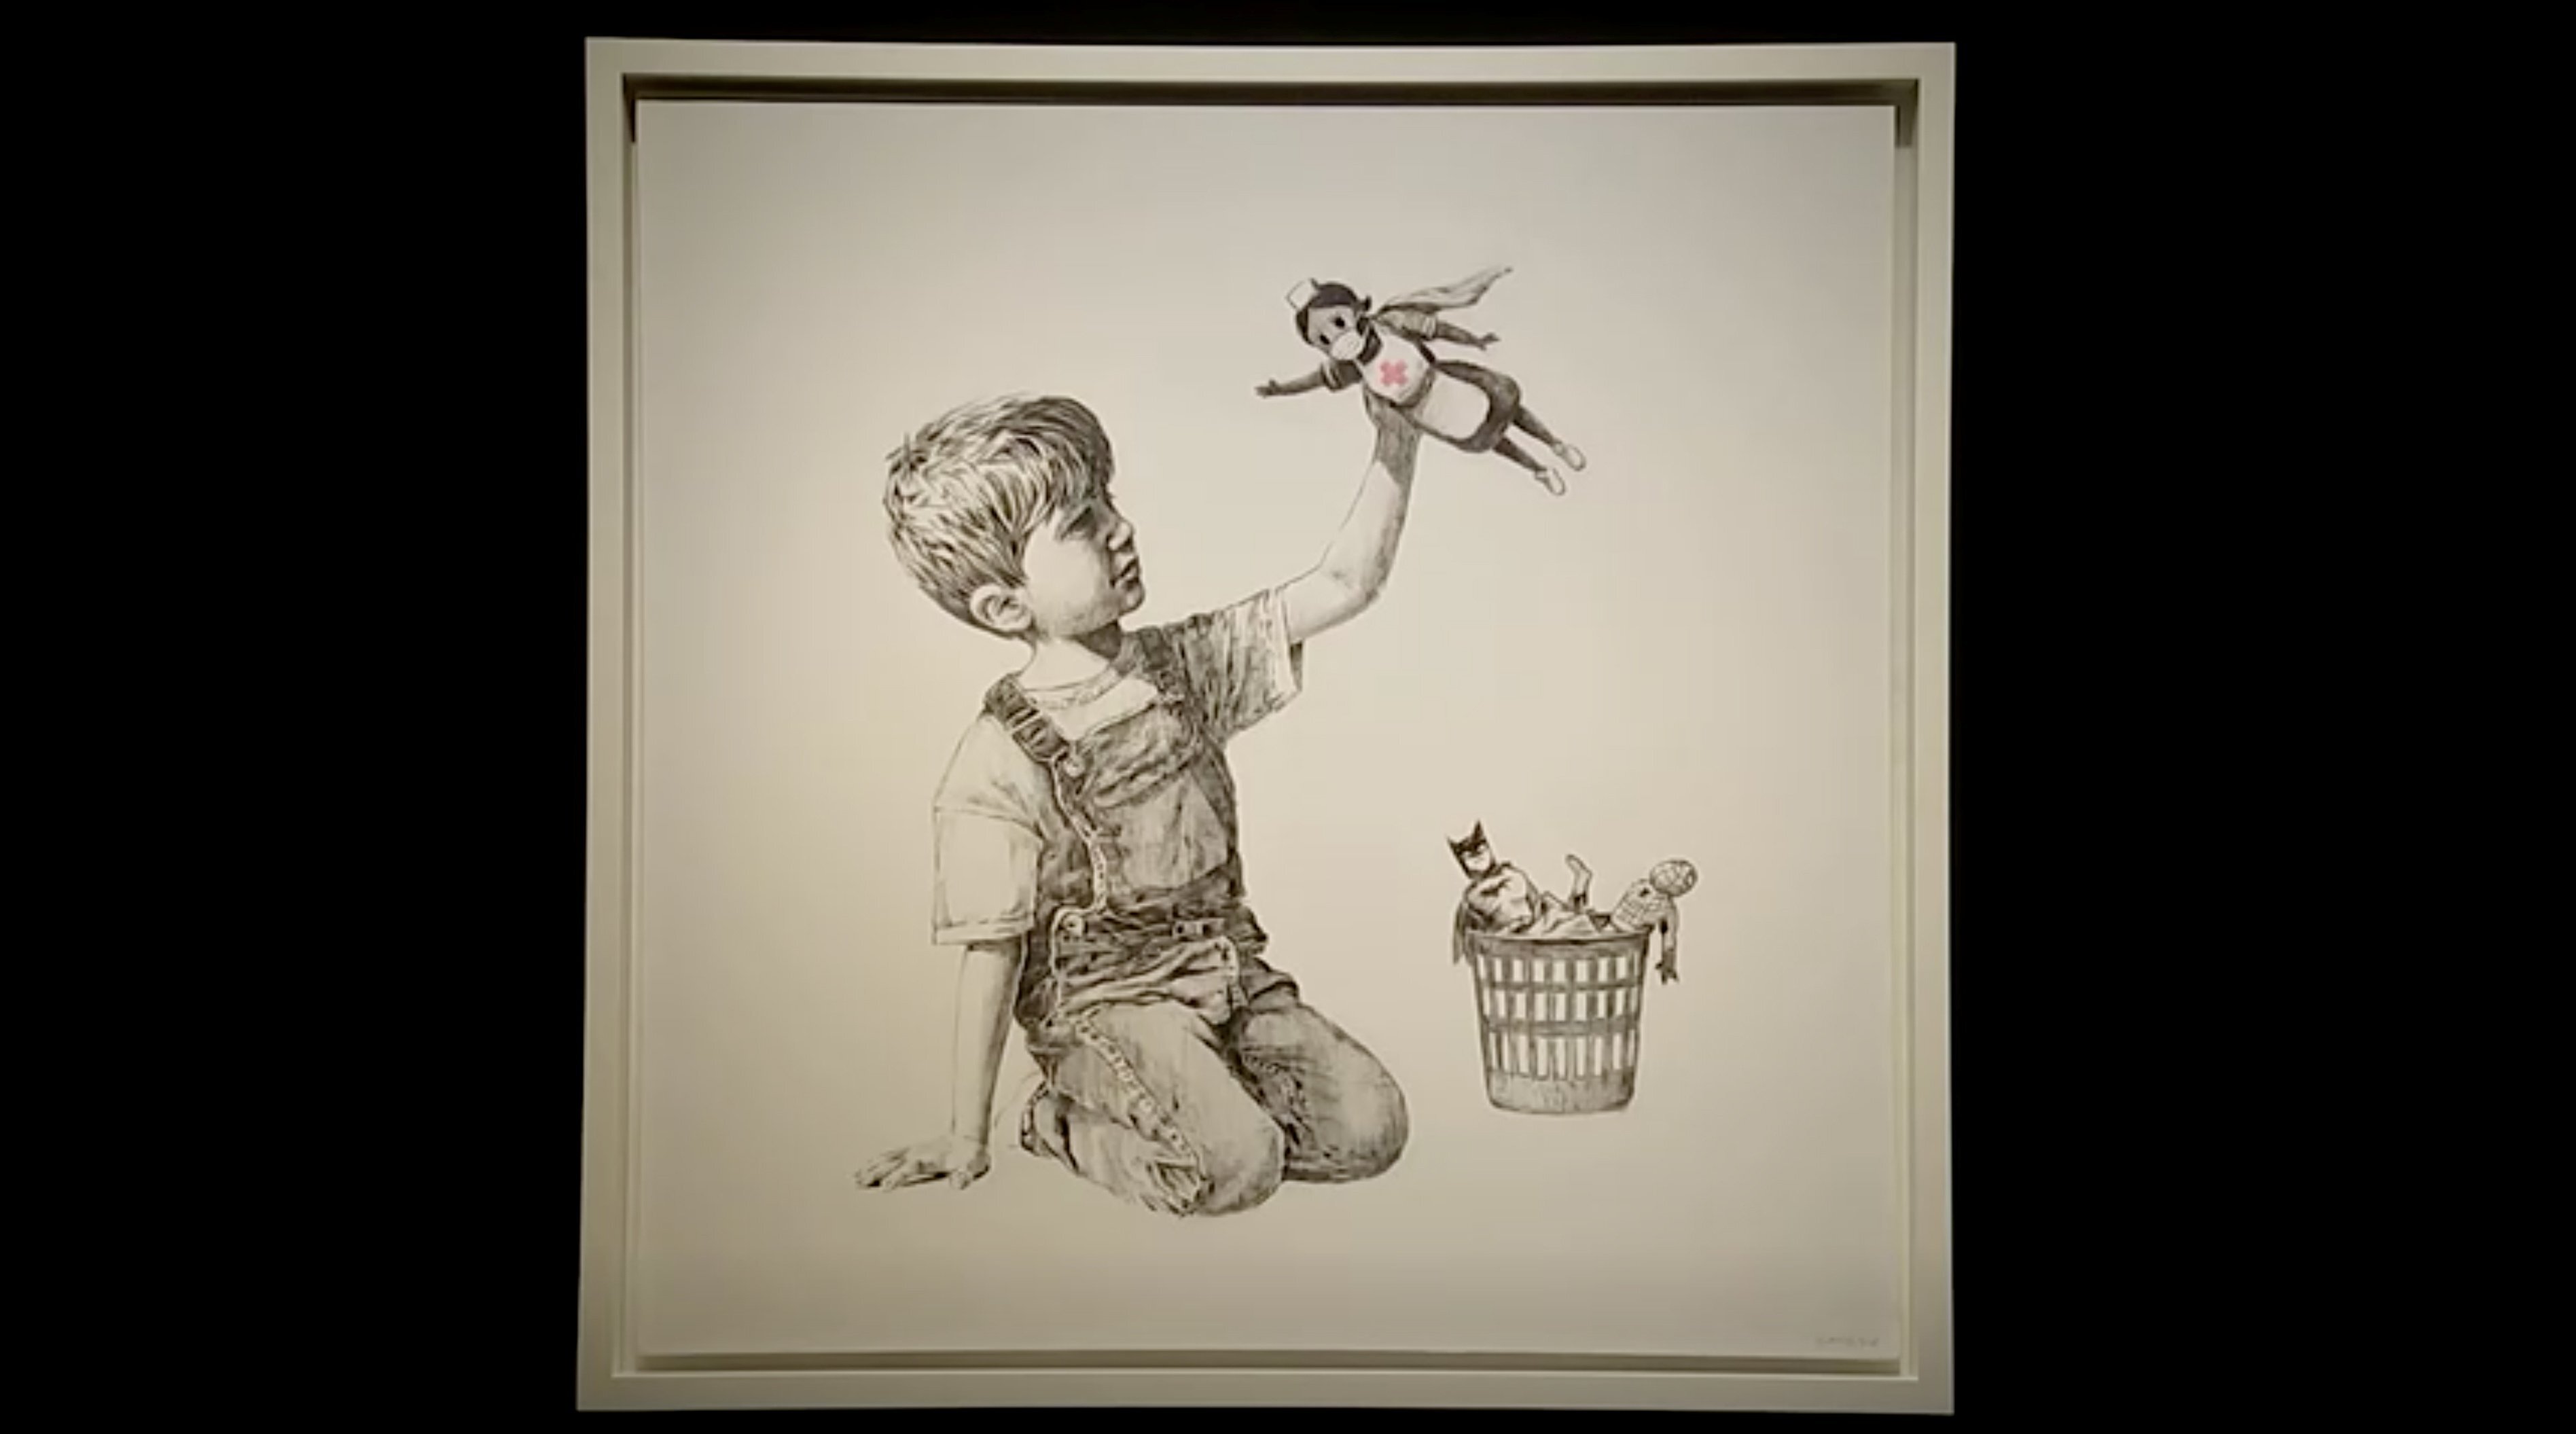 Banksy’s ‘Game Changer’ is seen on display at Christies London. Photo: Reuters